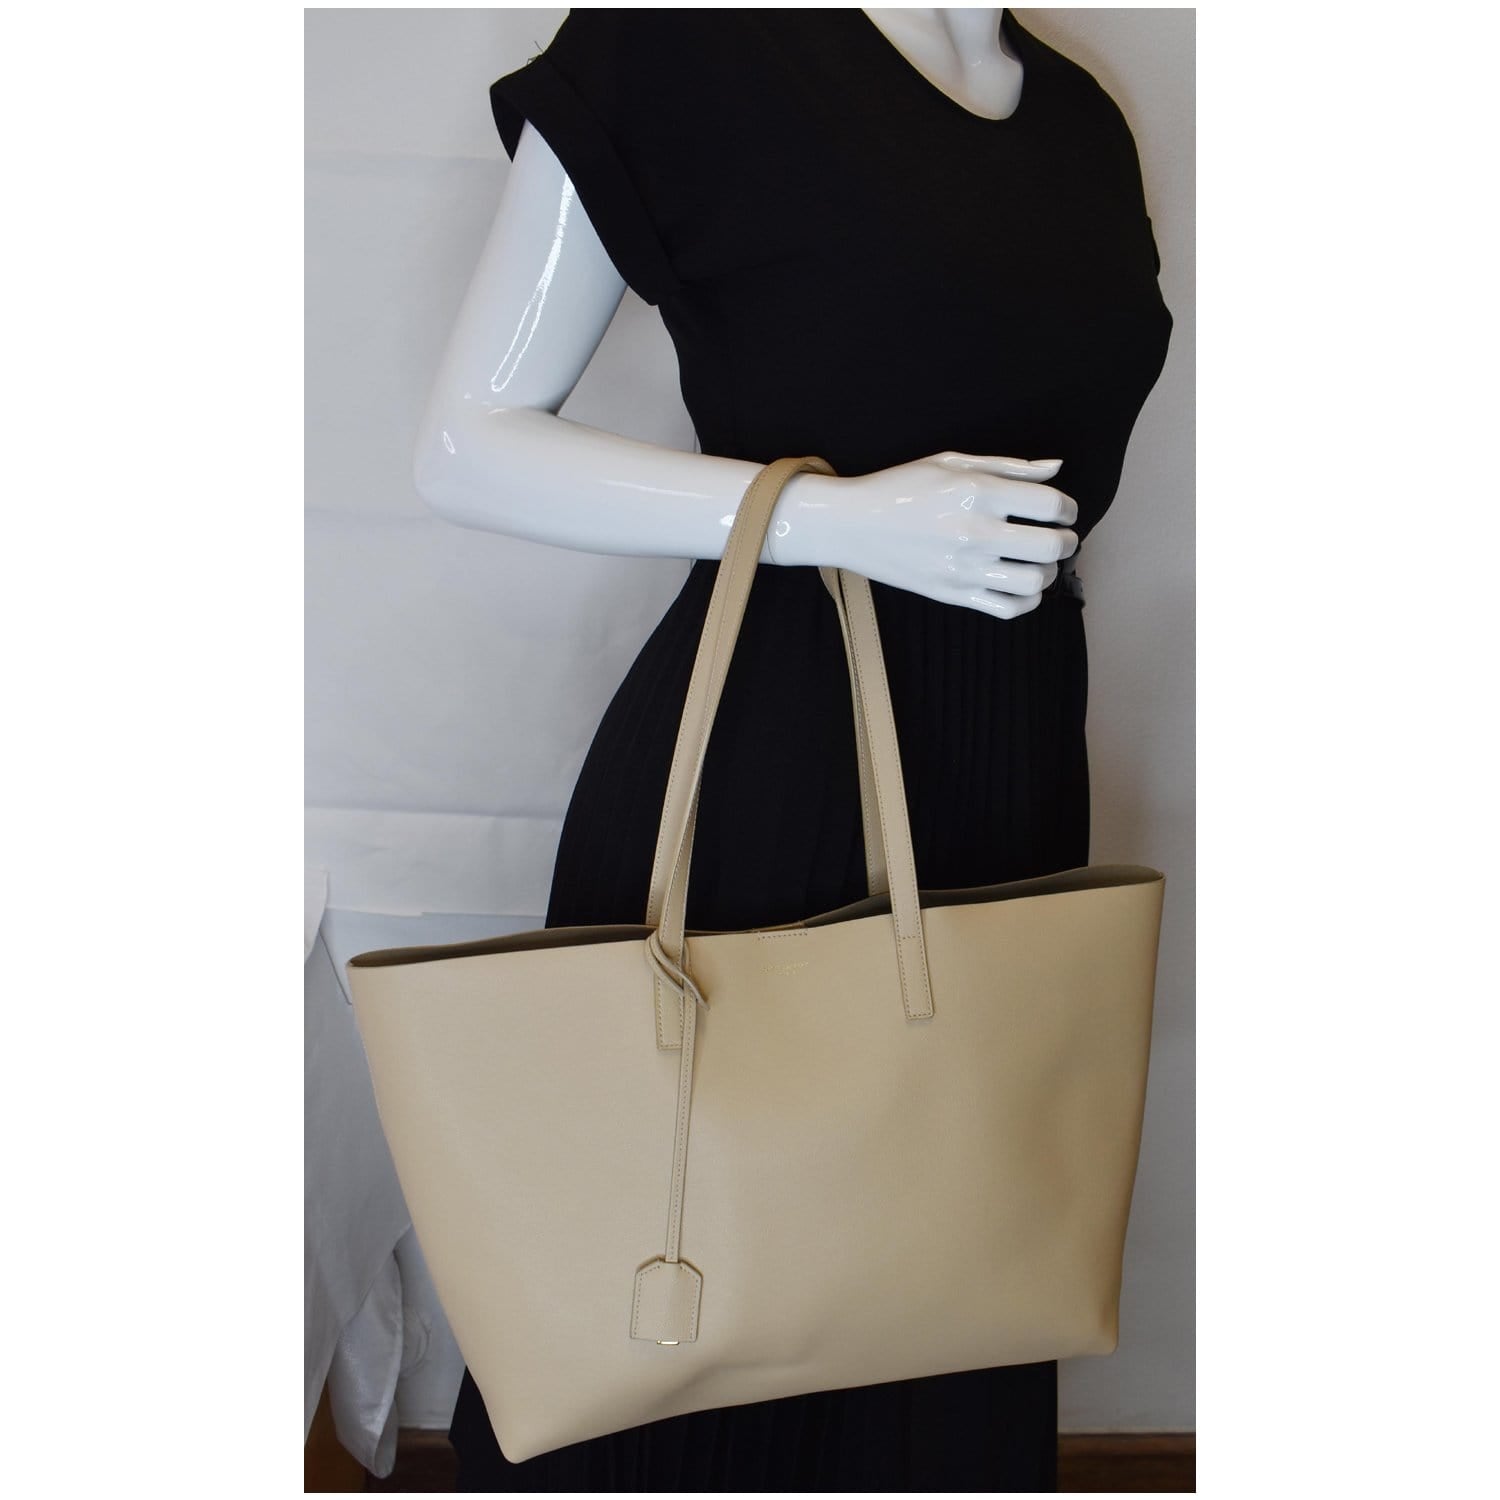 Shopping monogramme leather tote Saint Laurent Beige in Leather